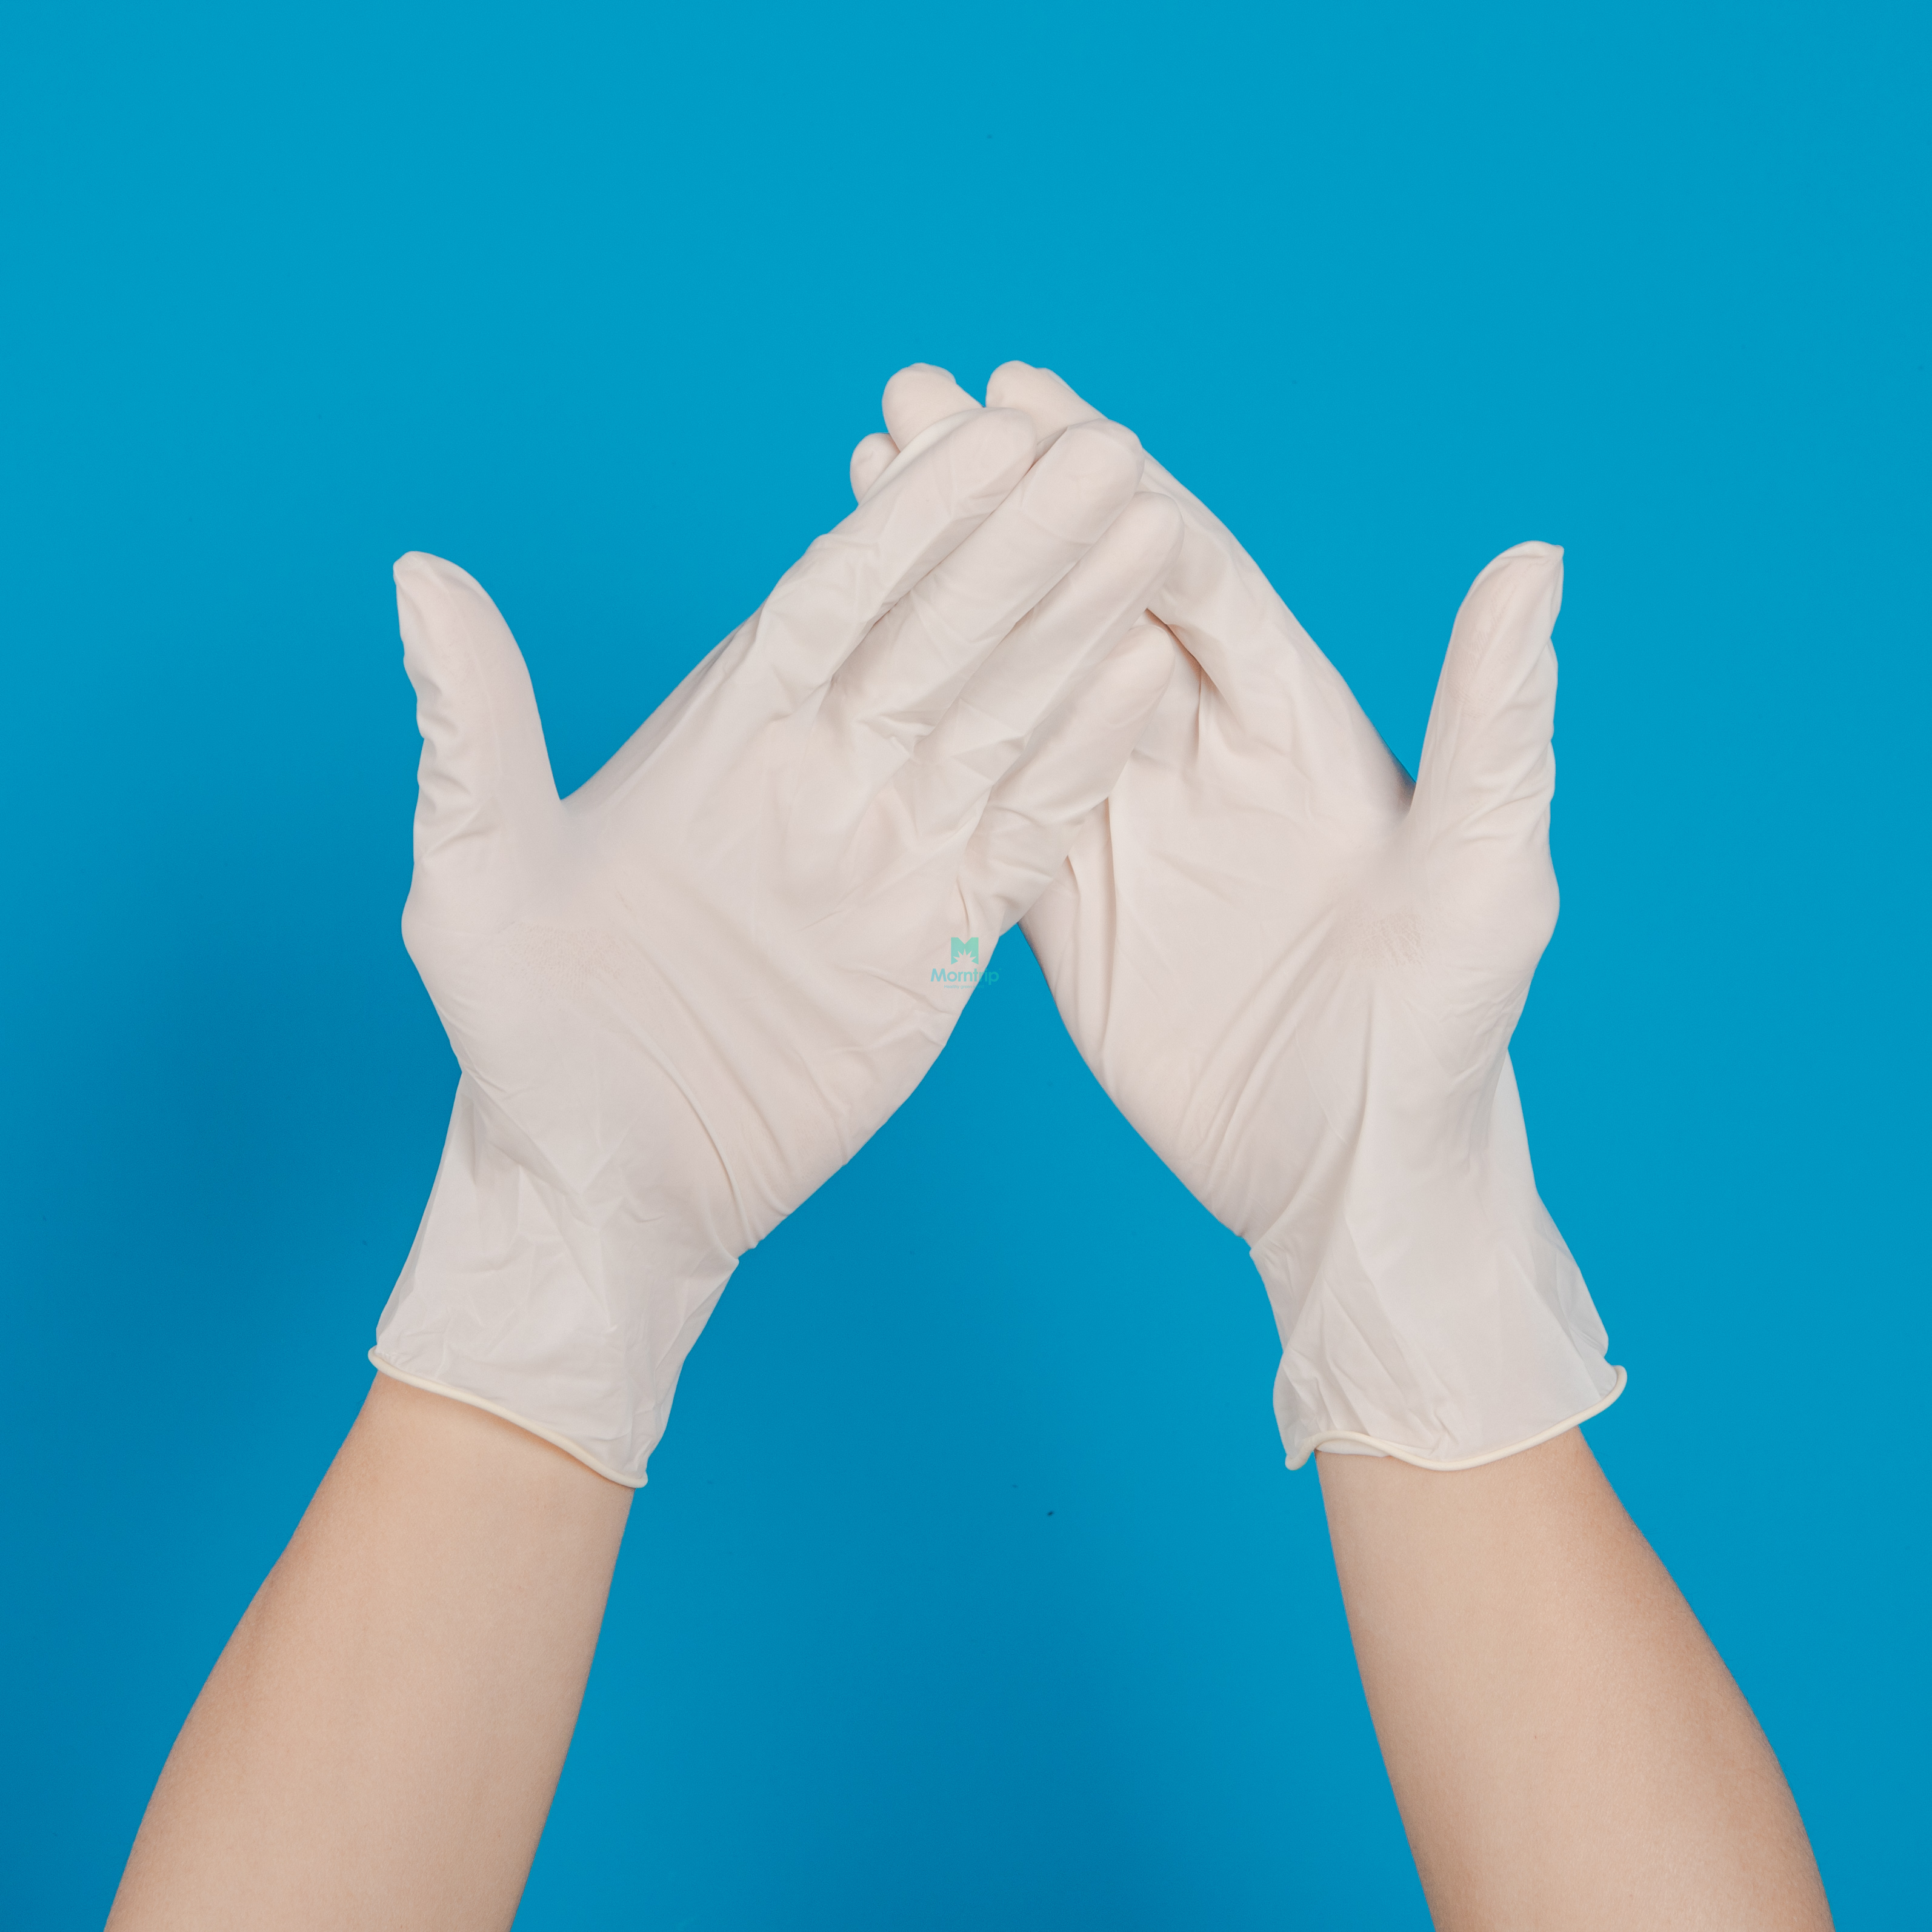 Safety Wholesale Protective Powder Free Examination Disposable Latex Gloves